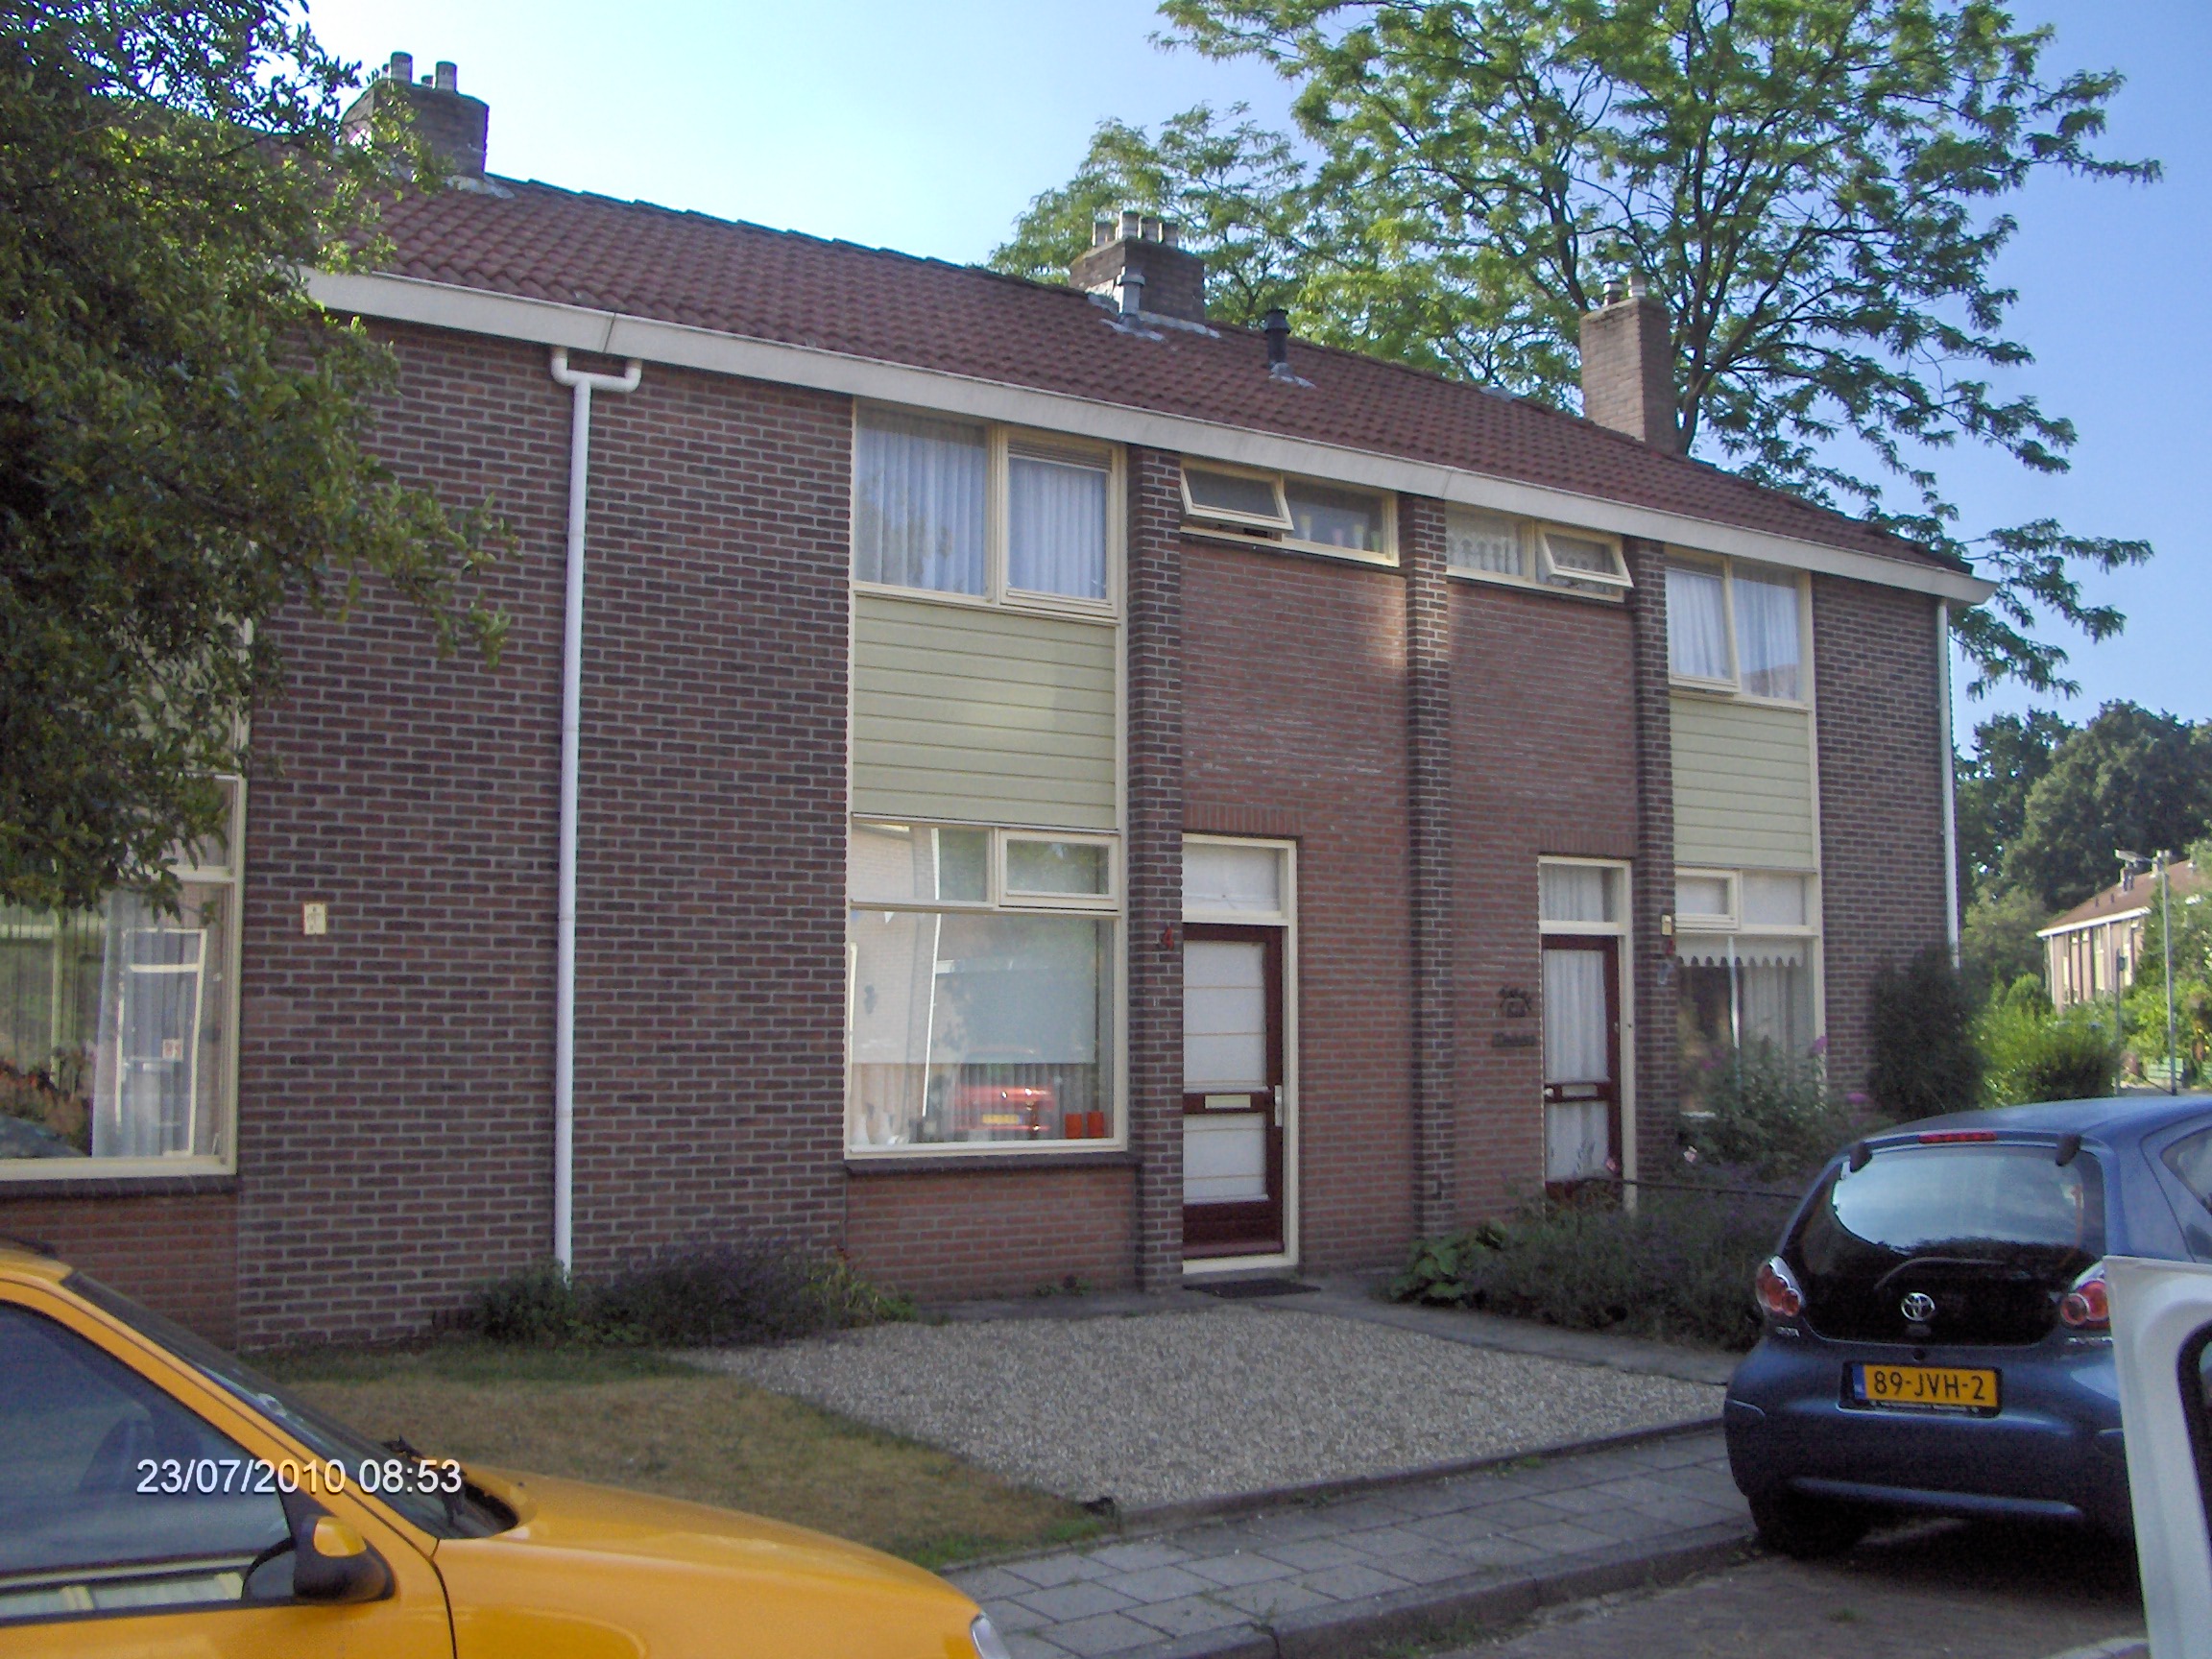 Doctor A.M. Dhontstraat 4